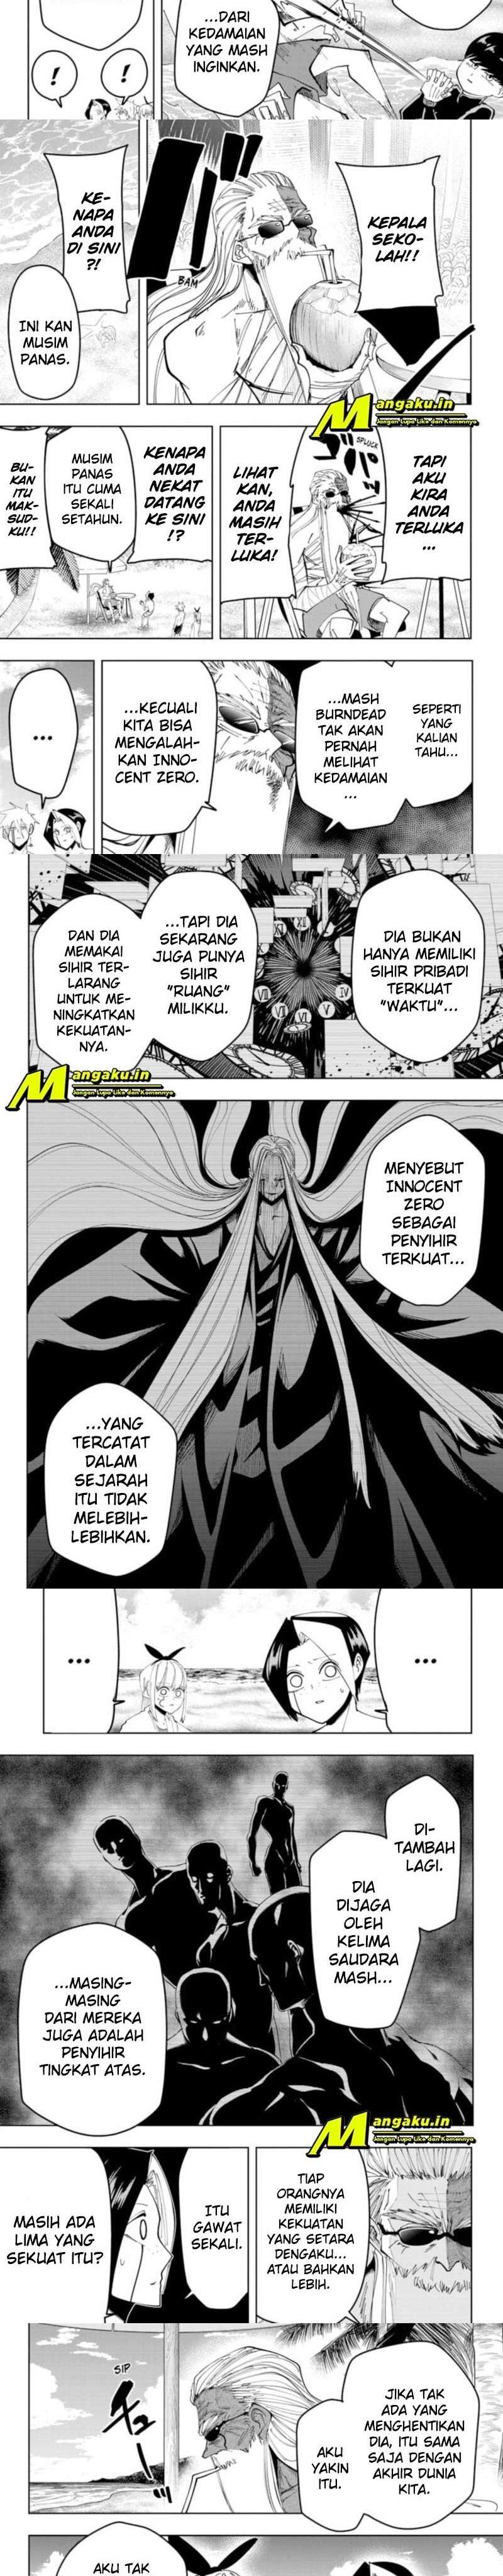 Mashle: Magic and Muscles Chapter 73